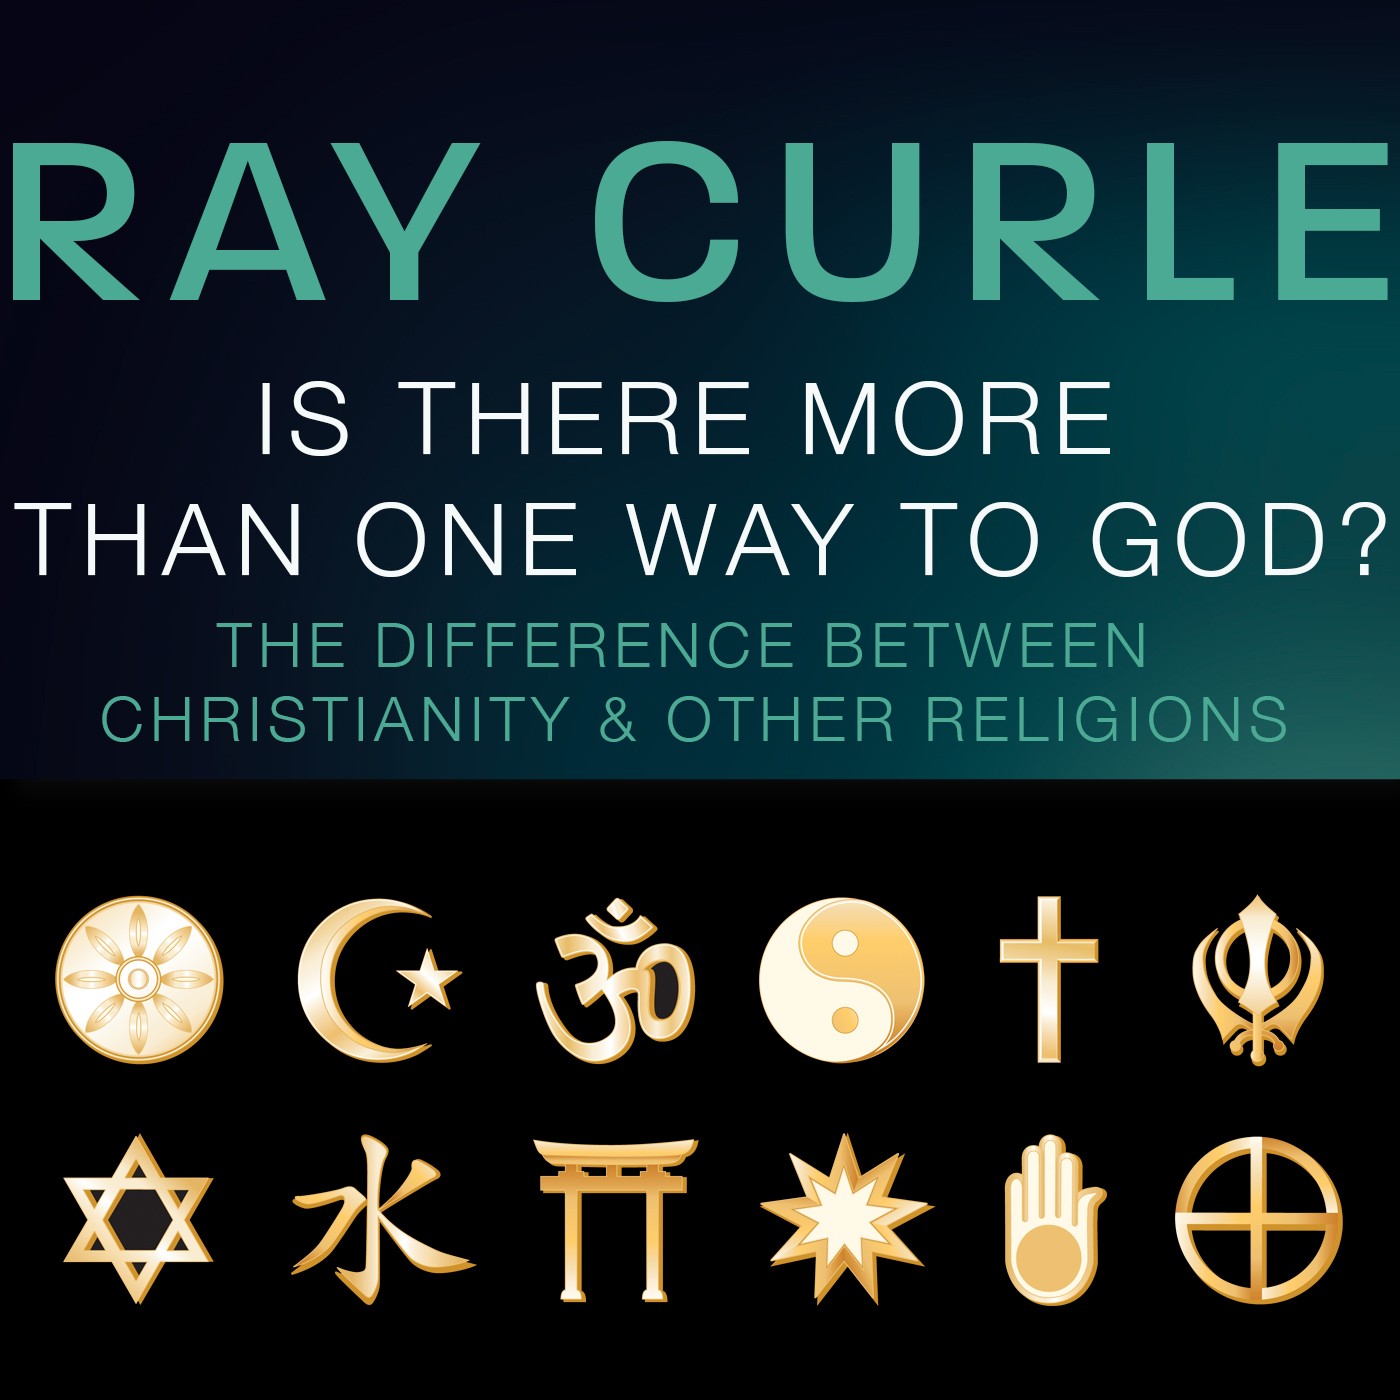 Is there more than one way to God?